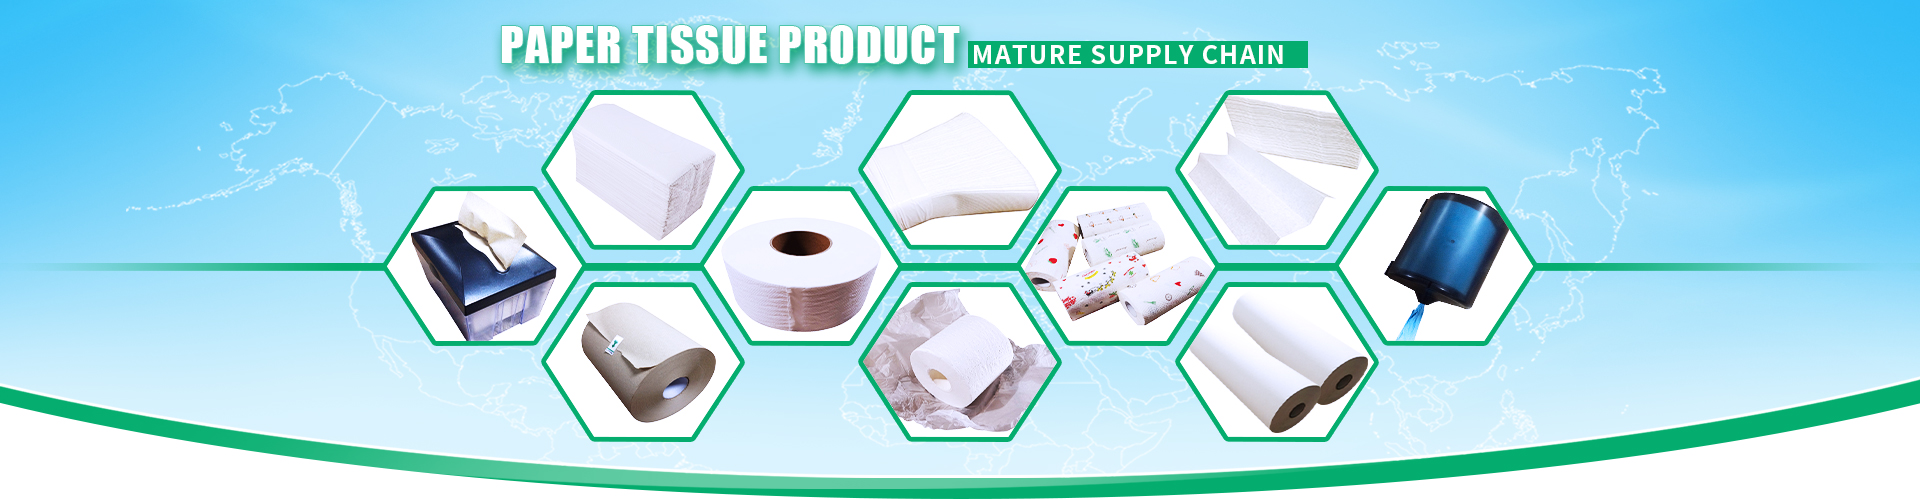 Ultraslim Paper Hand Tissue Bamboo pulp - Chaozhou Soft Paper Products Co.,Ltd